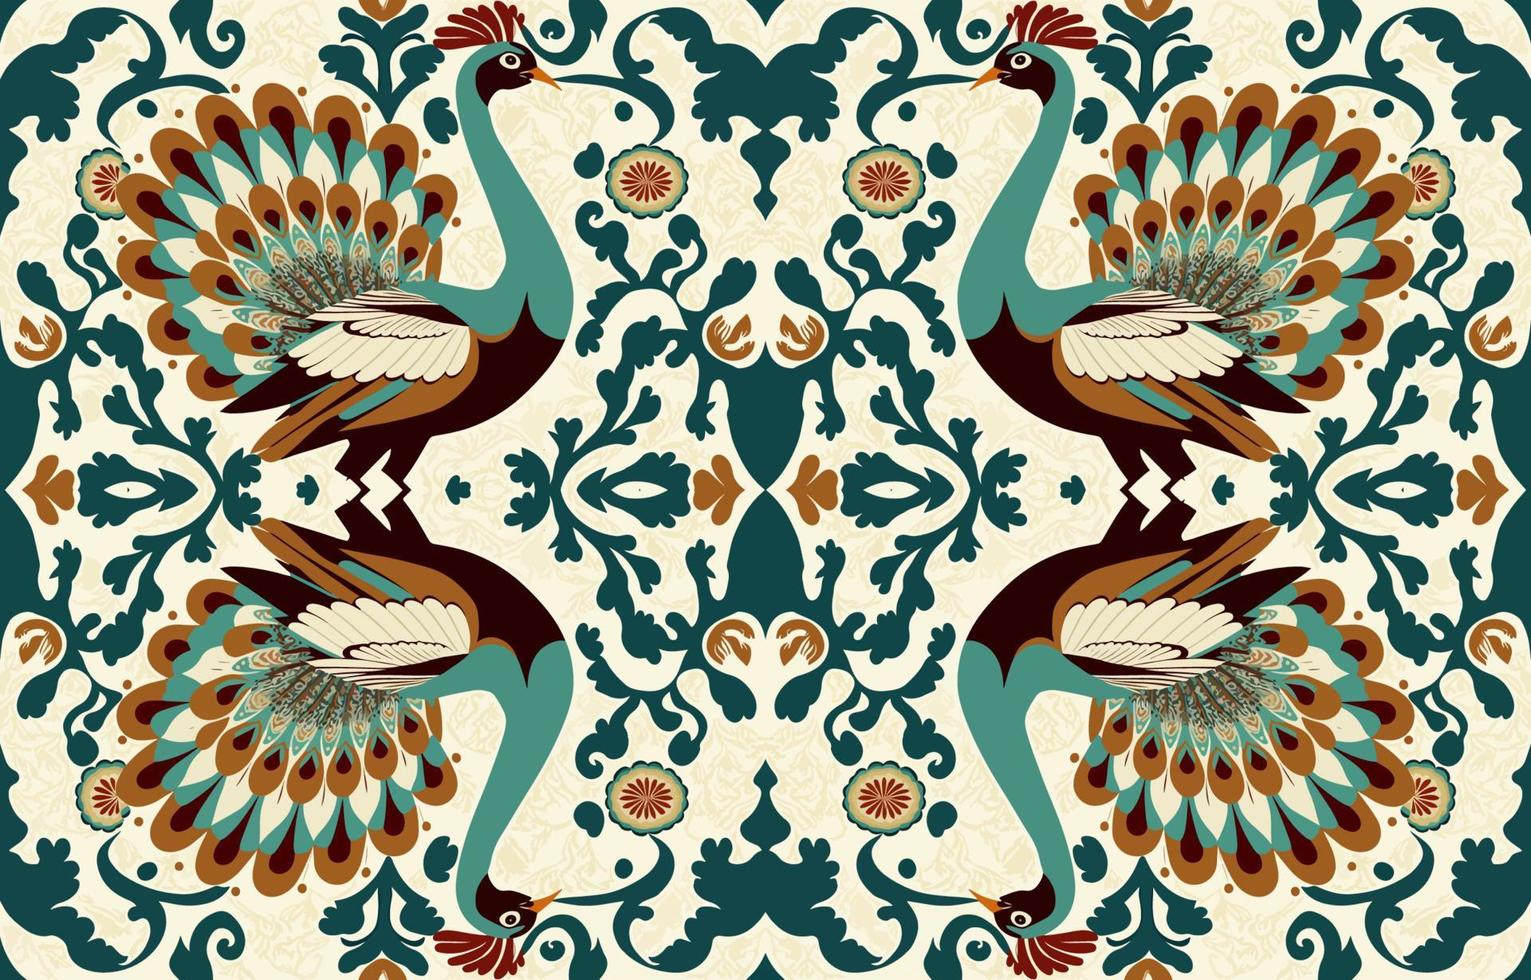 Turkey chicken pheasant peacock fabric seamless pattern. Abstract fabric textile line graphic antique style. Ethnic vector ornate elegant luxury vintage retro design. Art print for clothing background